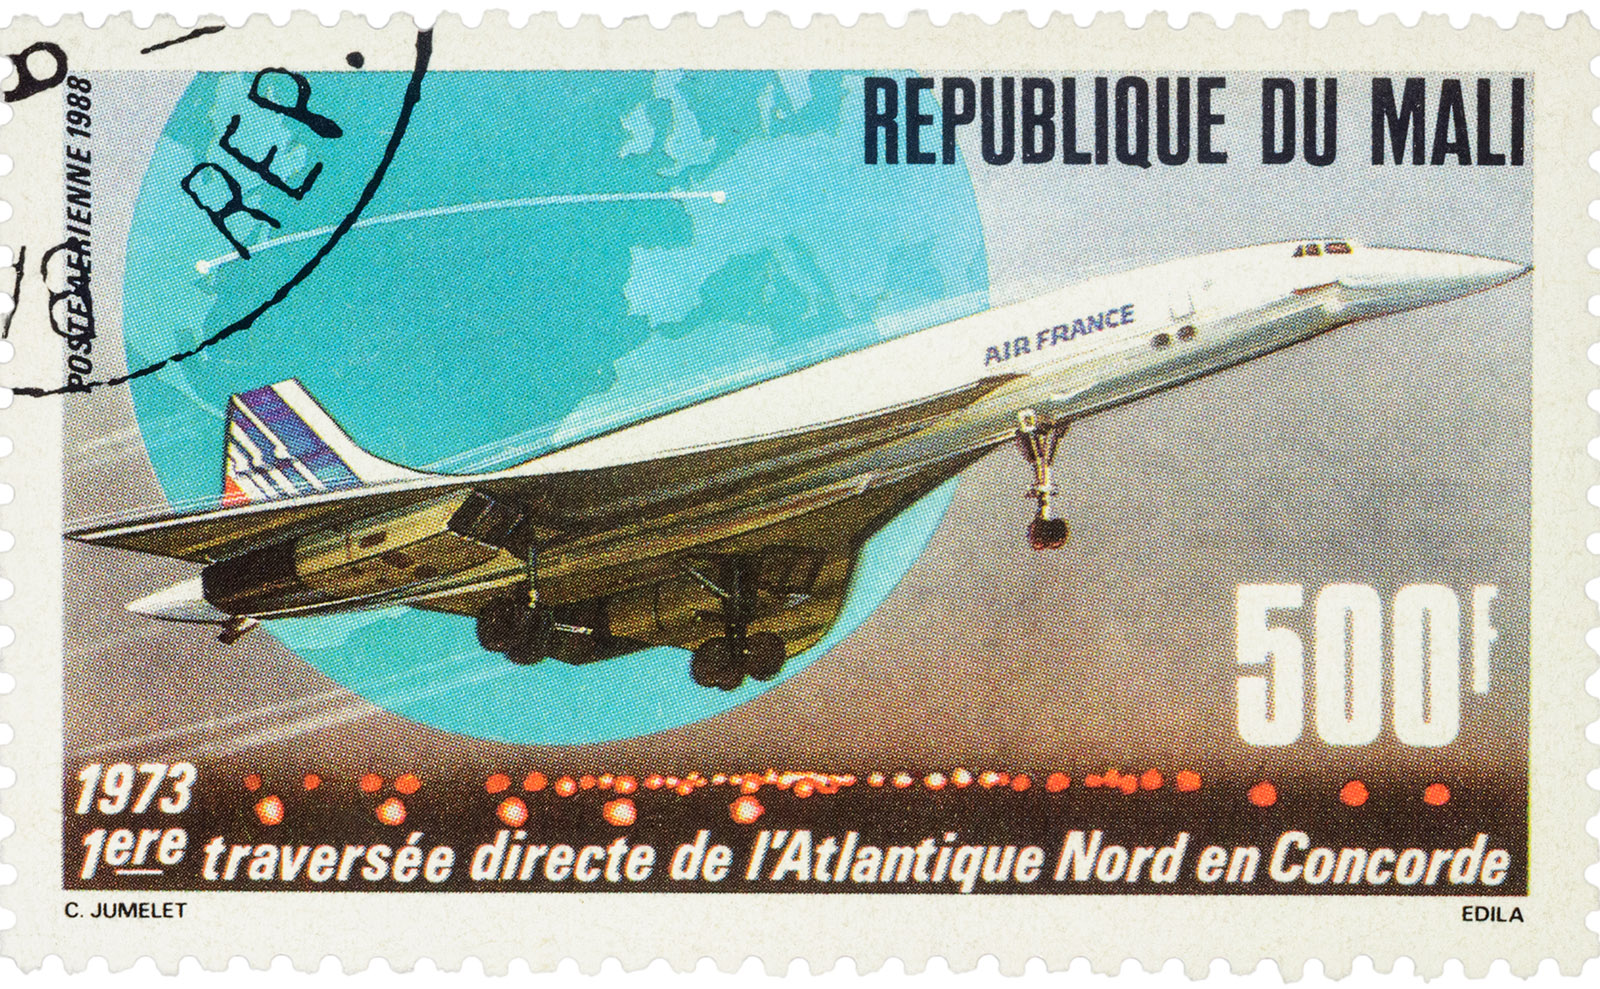 vintage color stamp of the concorde airplane flying in a blue sky